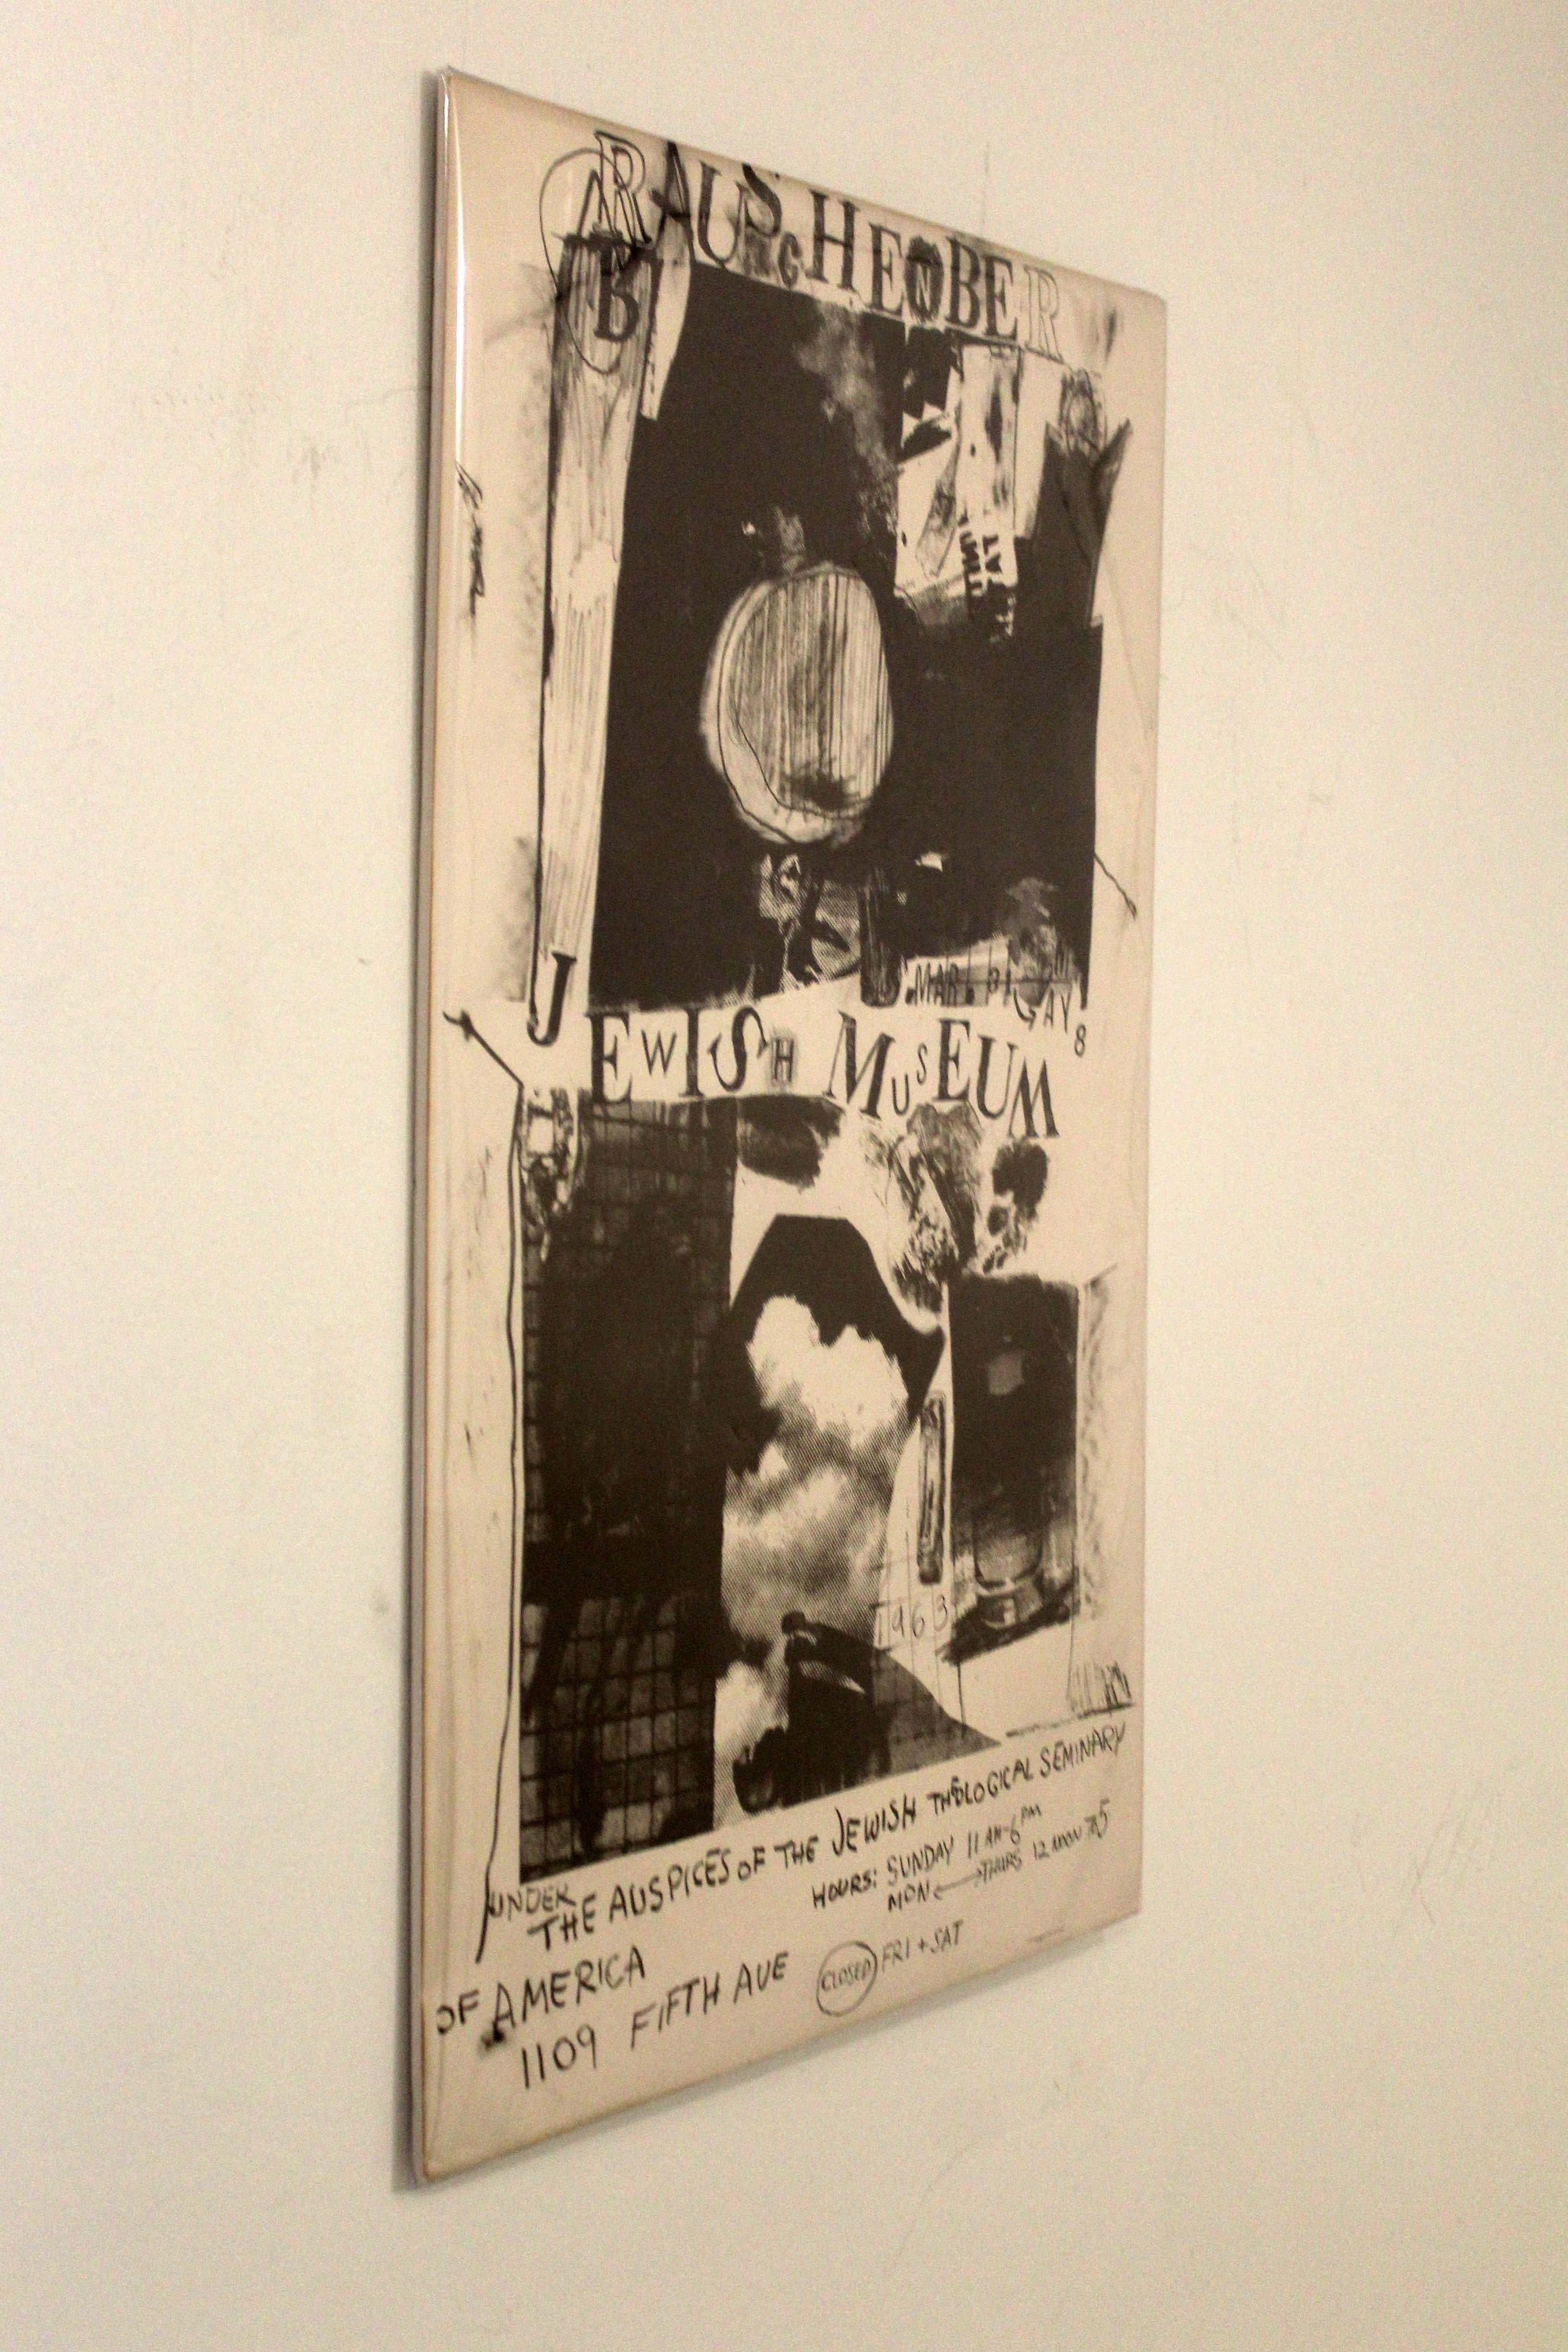 A graphic modern vintage exhibition poster showcasing Robert Rauschenberg at the Jewish Museum in New York City, March 31 - May 8 1963. Exhibition titled Under the Auspices of the Jewish Theological Seminary of American. Rauschenberg was an American